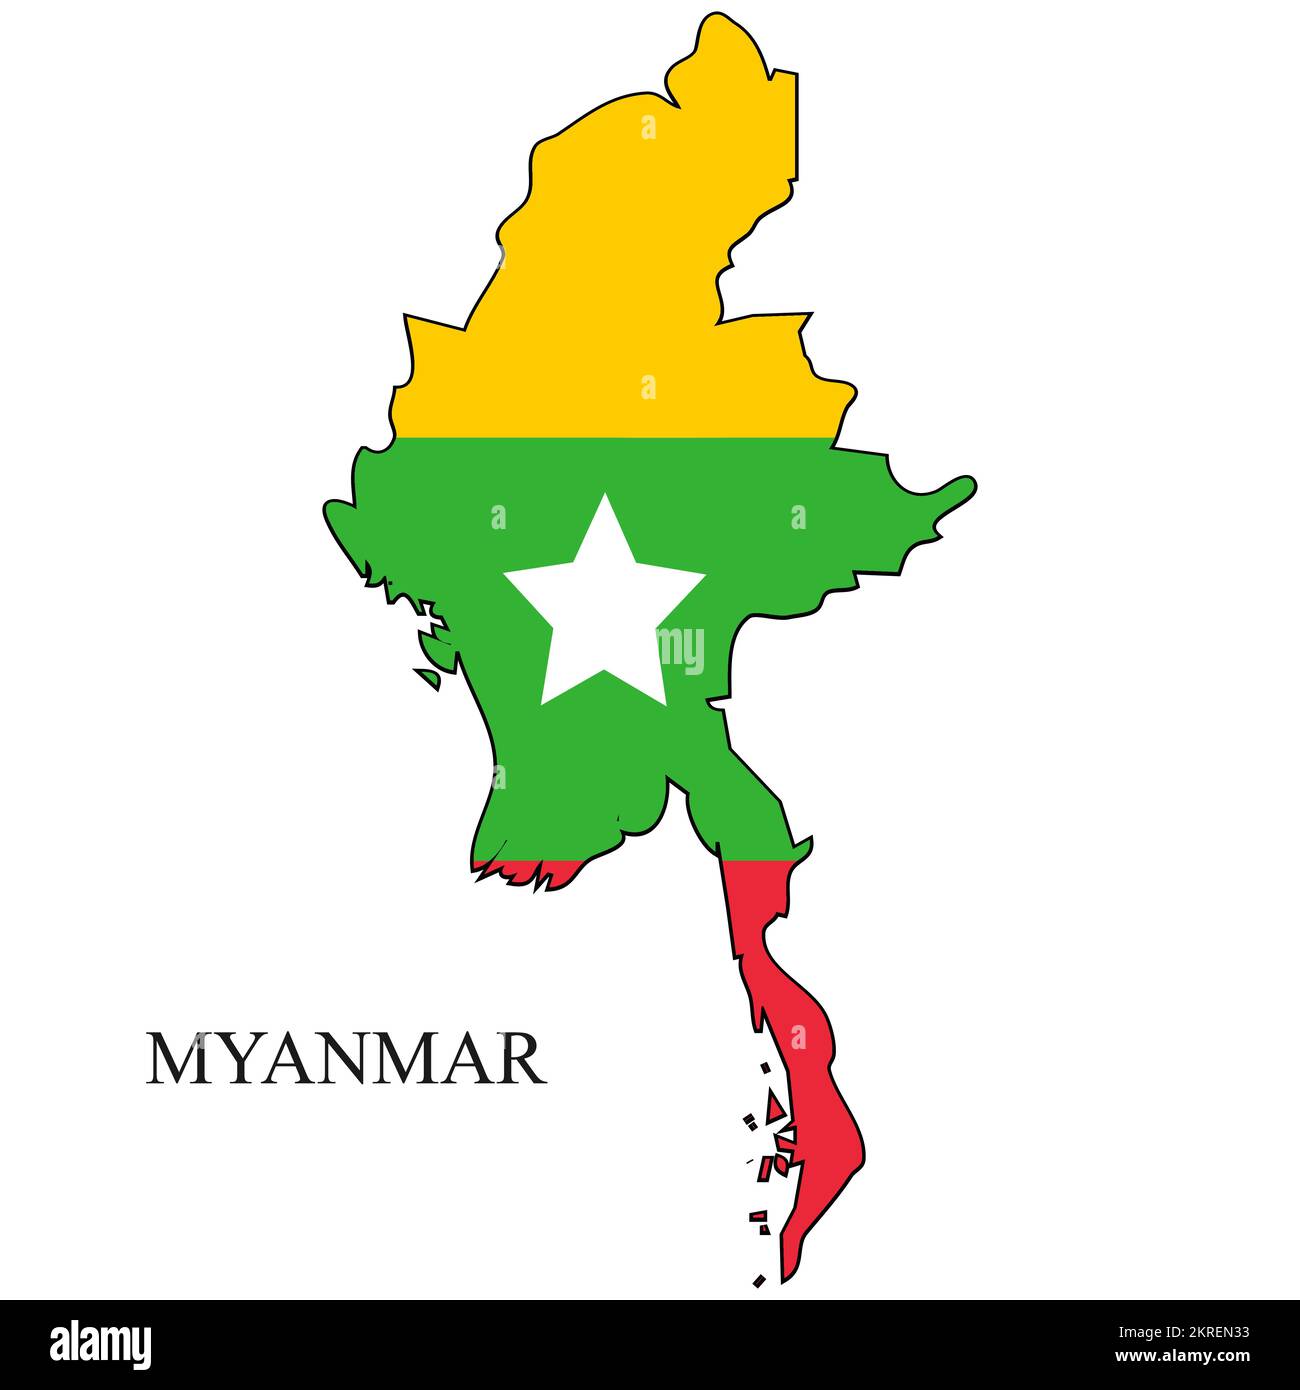 Myanmar (Burma) map vector illustration. Global economy. Famous country. South East Asia Stock Vector